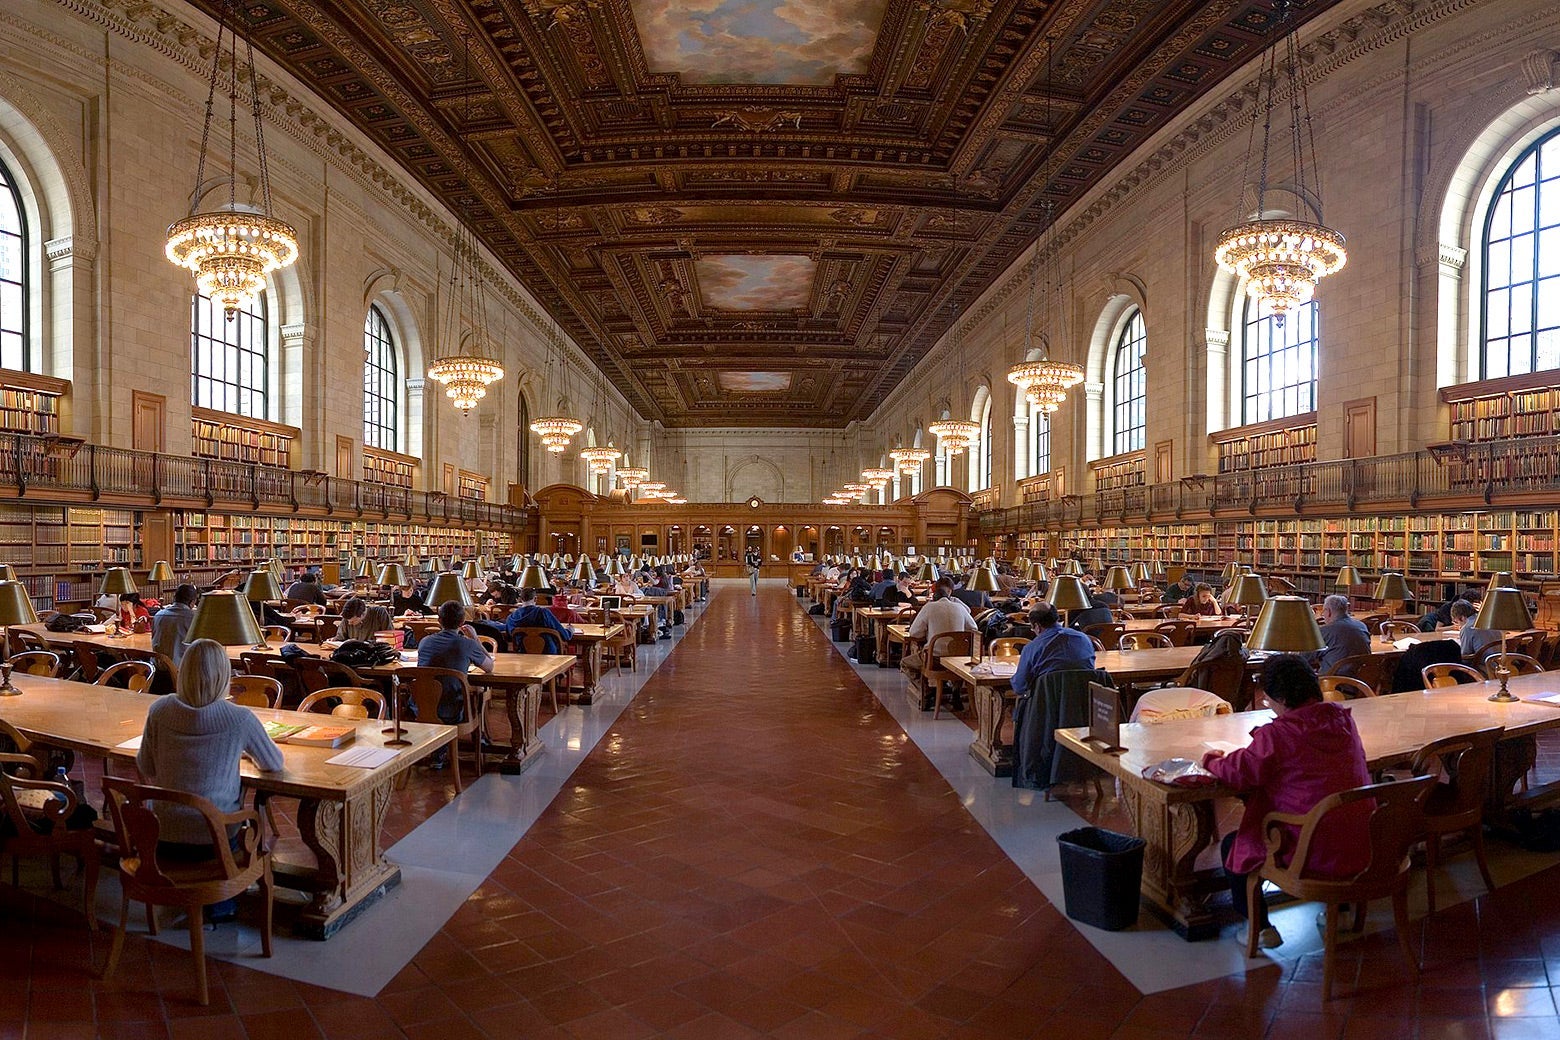 Patrons sit at long desks in an ornate reading room.